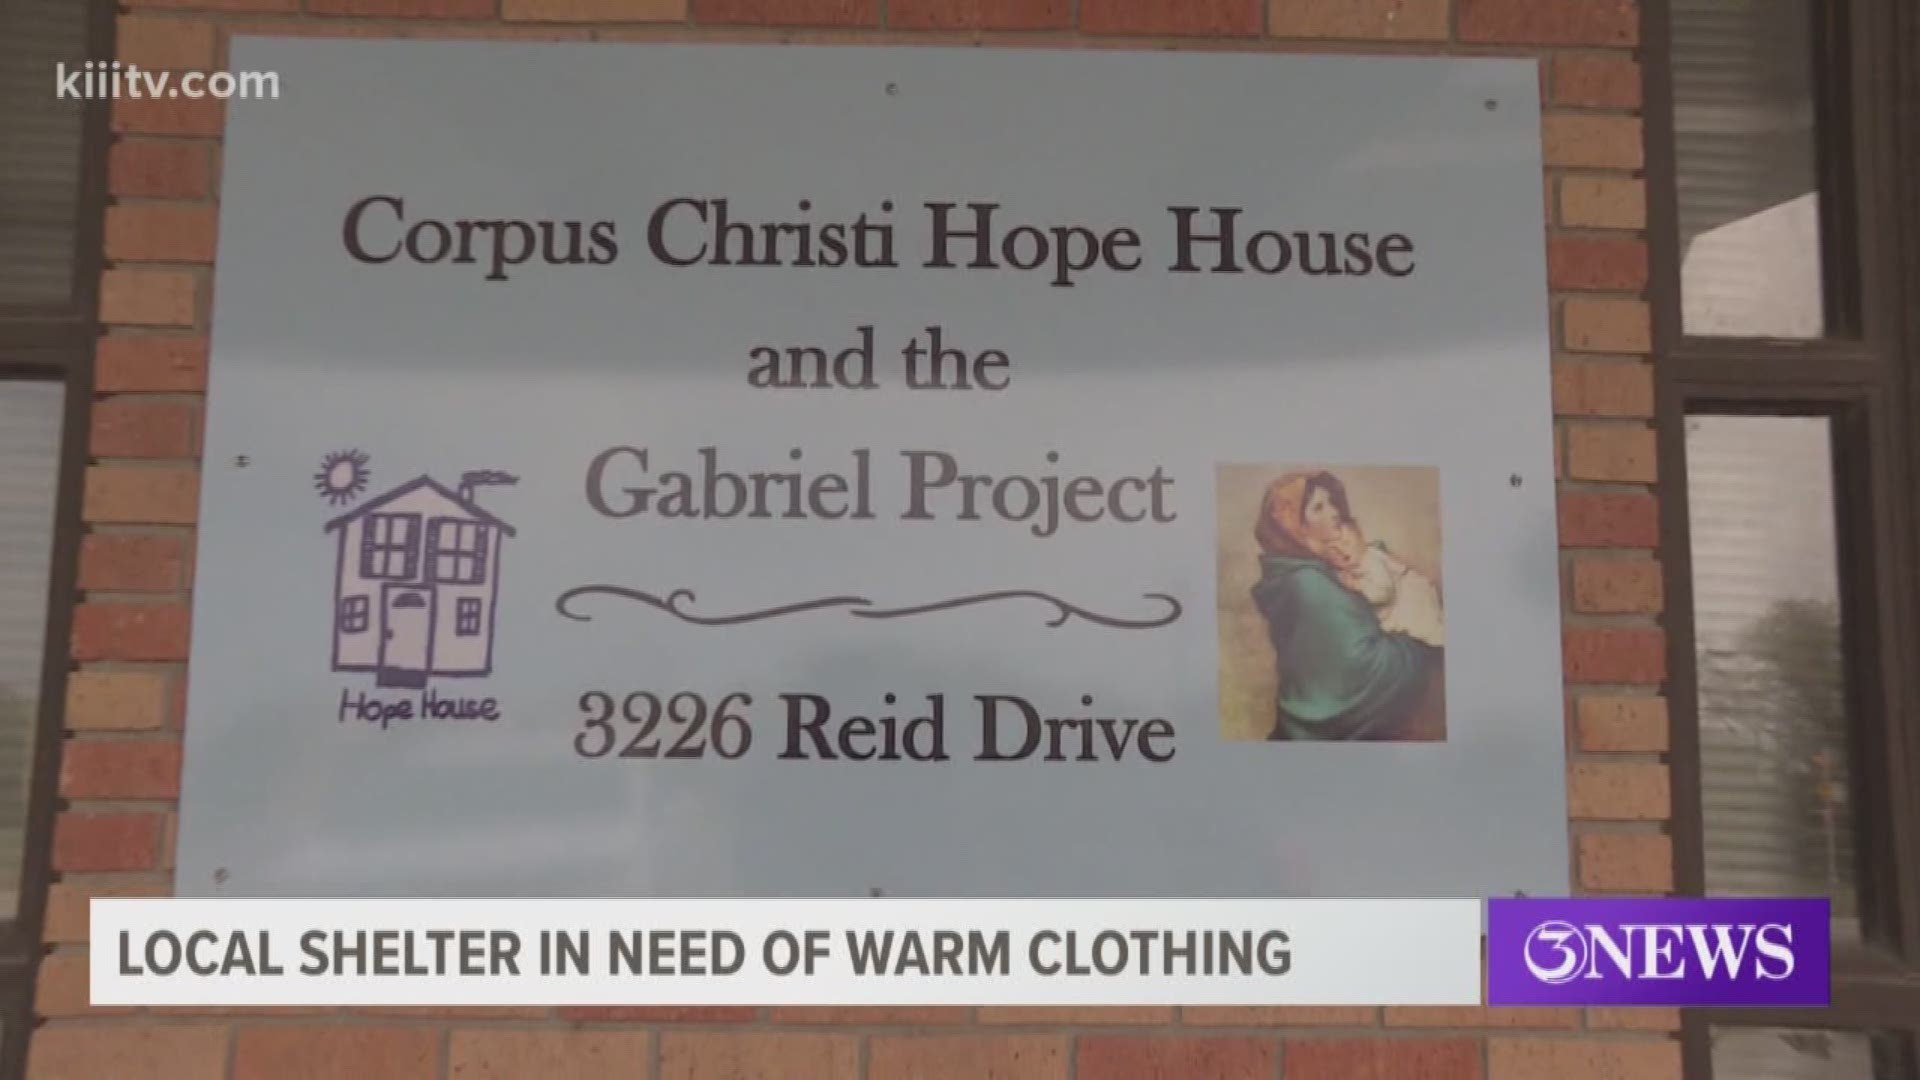 The Hope House is mostly busy from Fall through Winter with a demand for warm clothes.